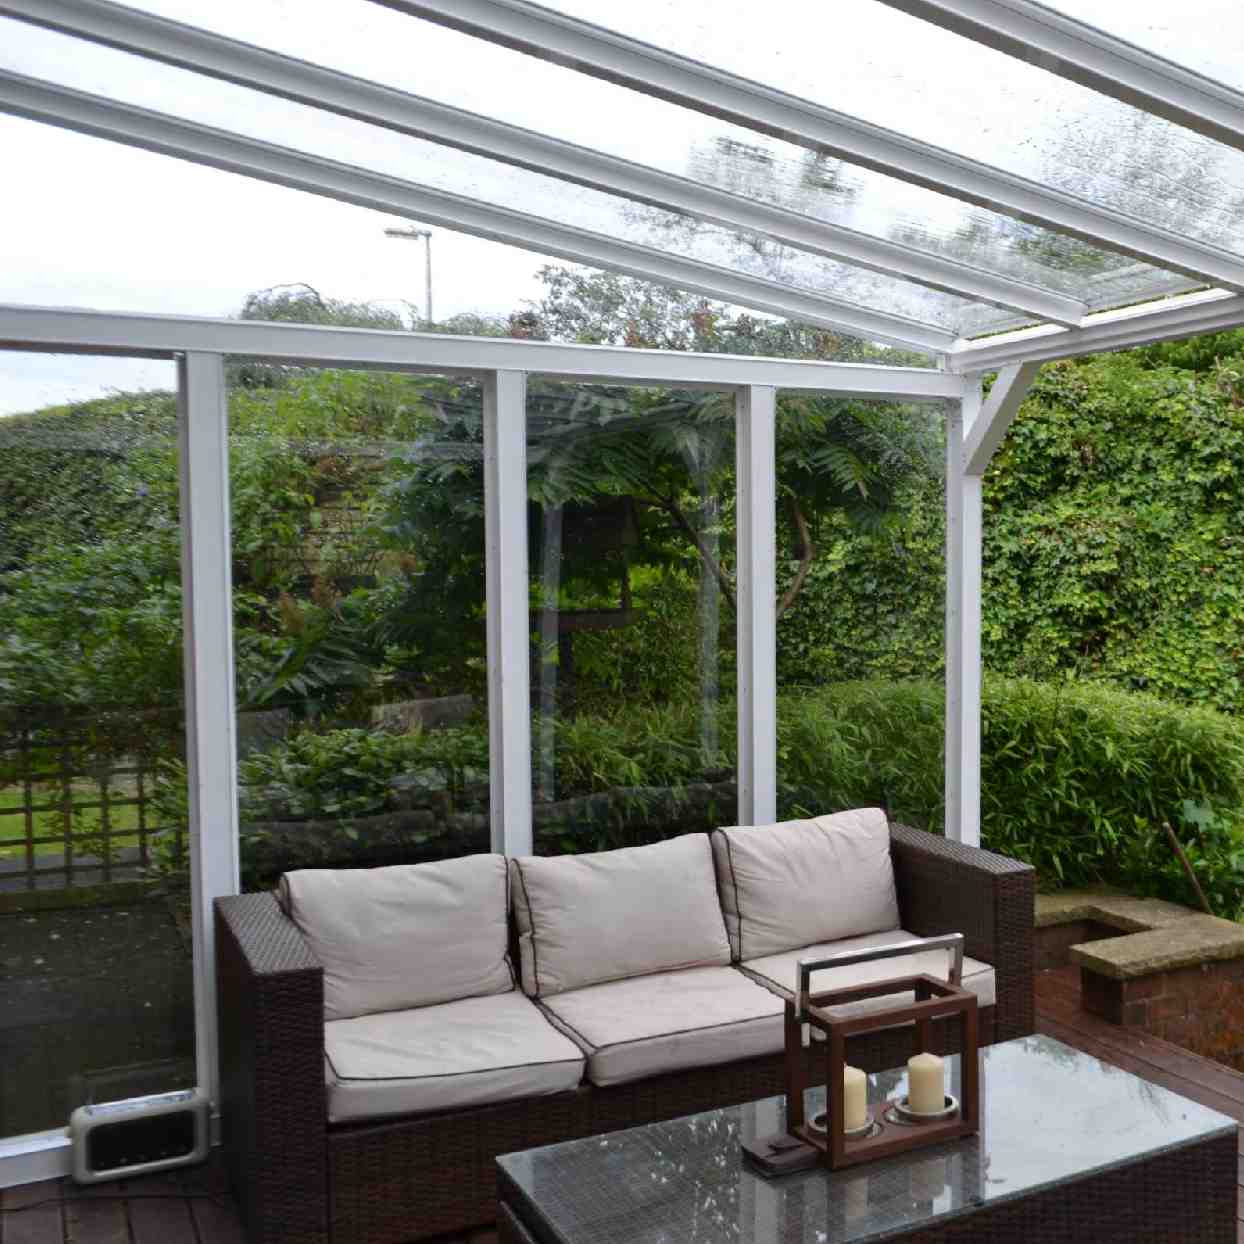 Buy Omega Verandah White with 16mm Polycarbonate Glazing - 2.1m (W) x 3.0m (P), (2) Supporting Posts online today